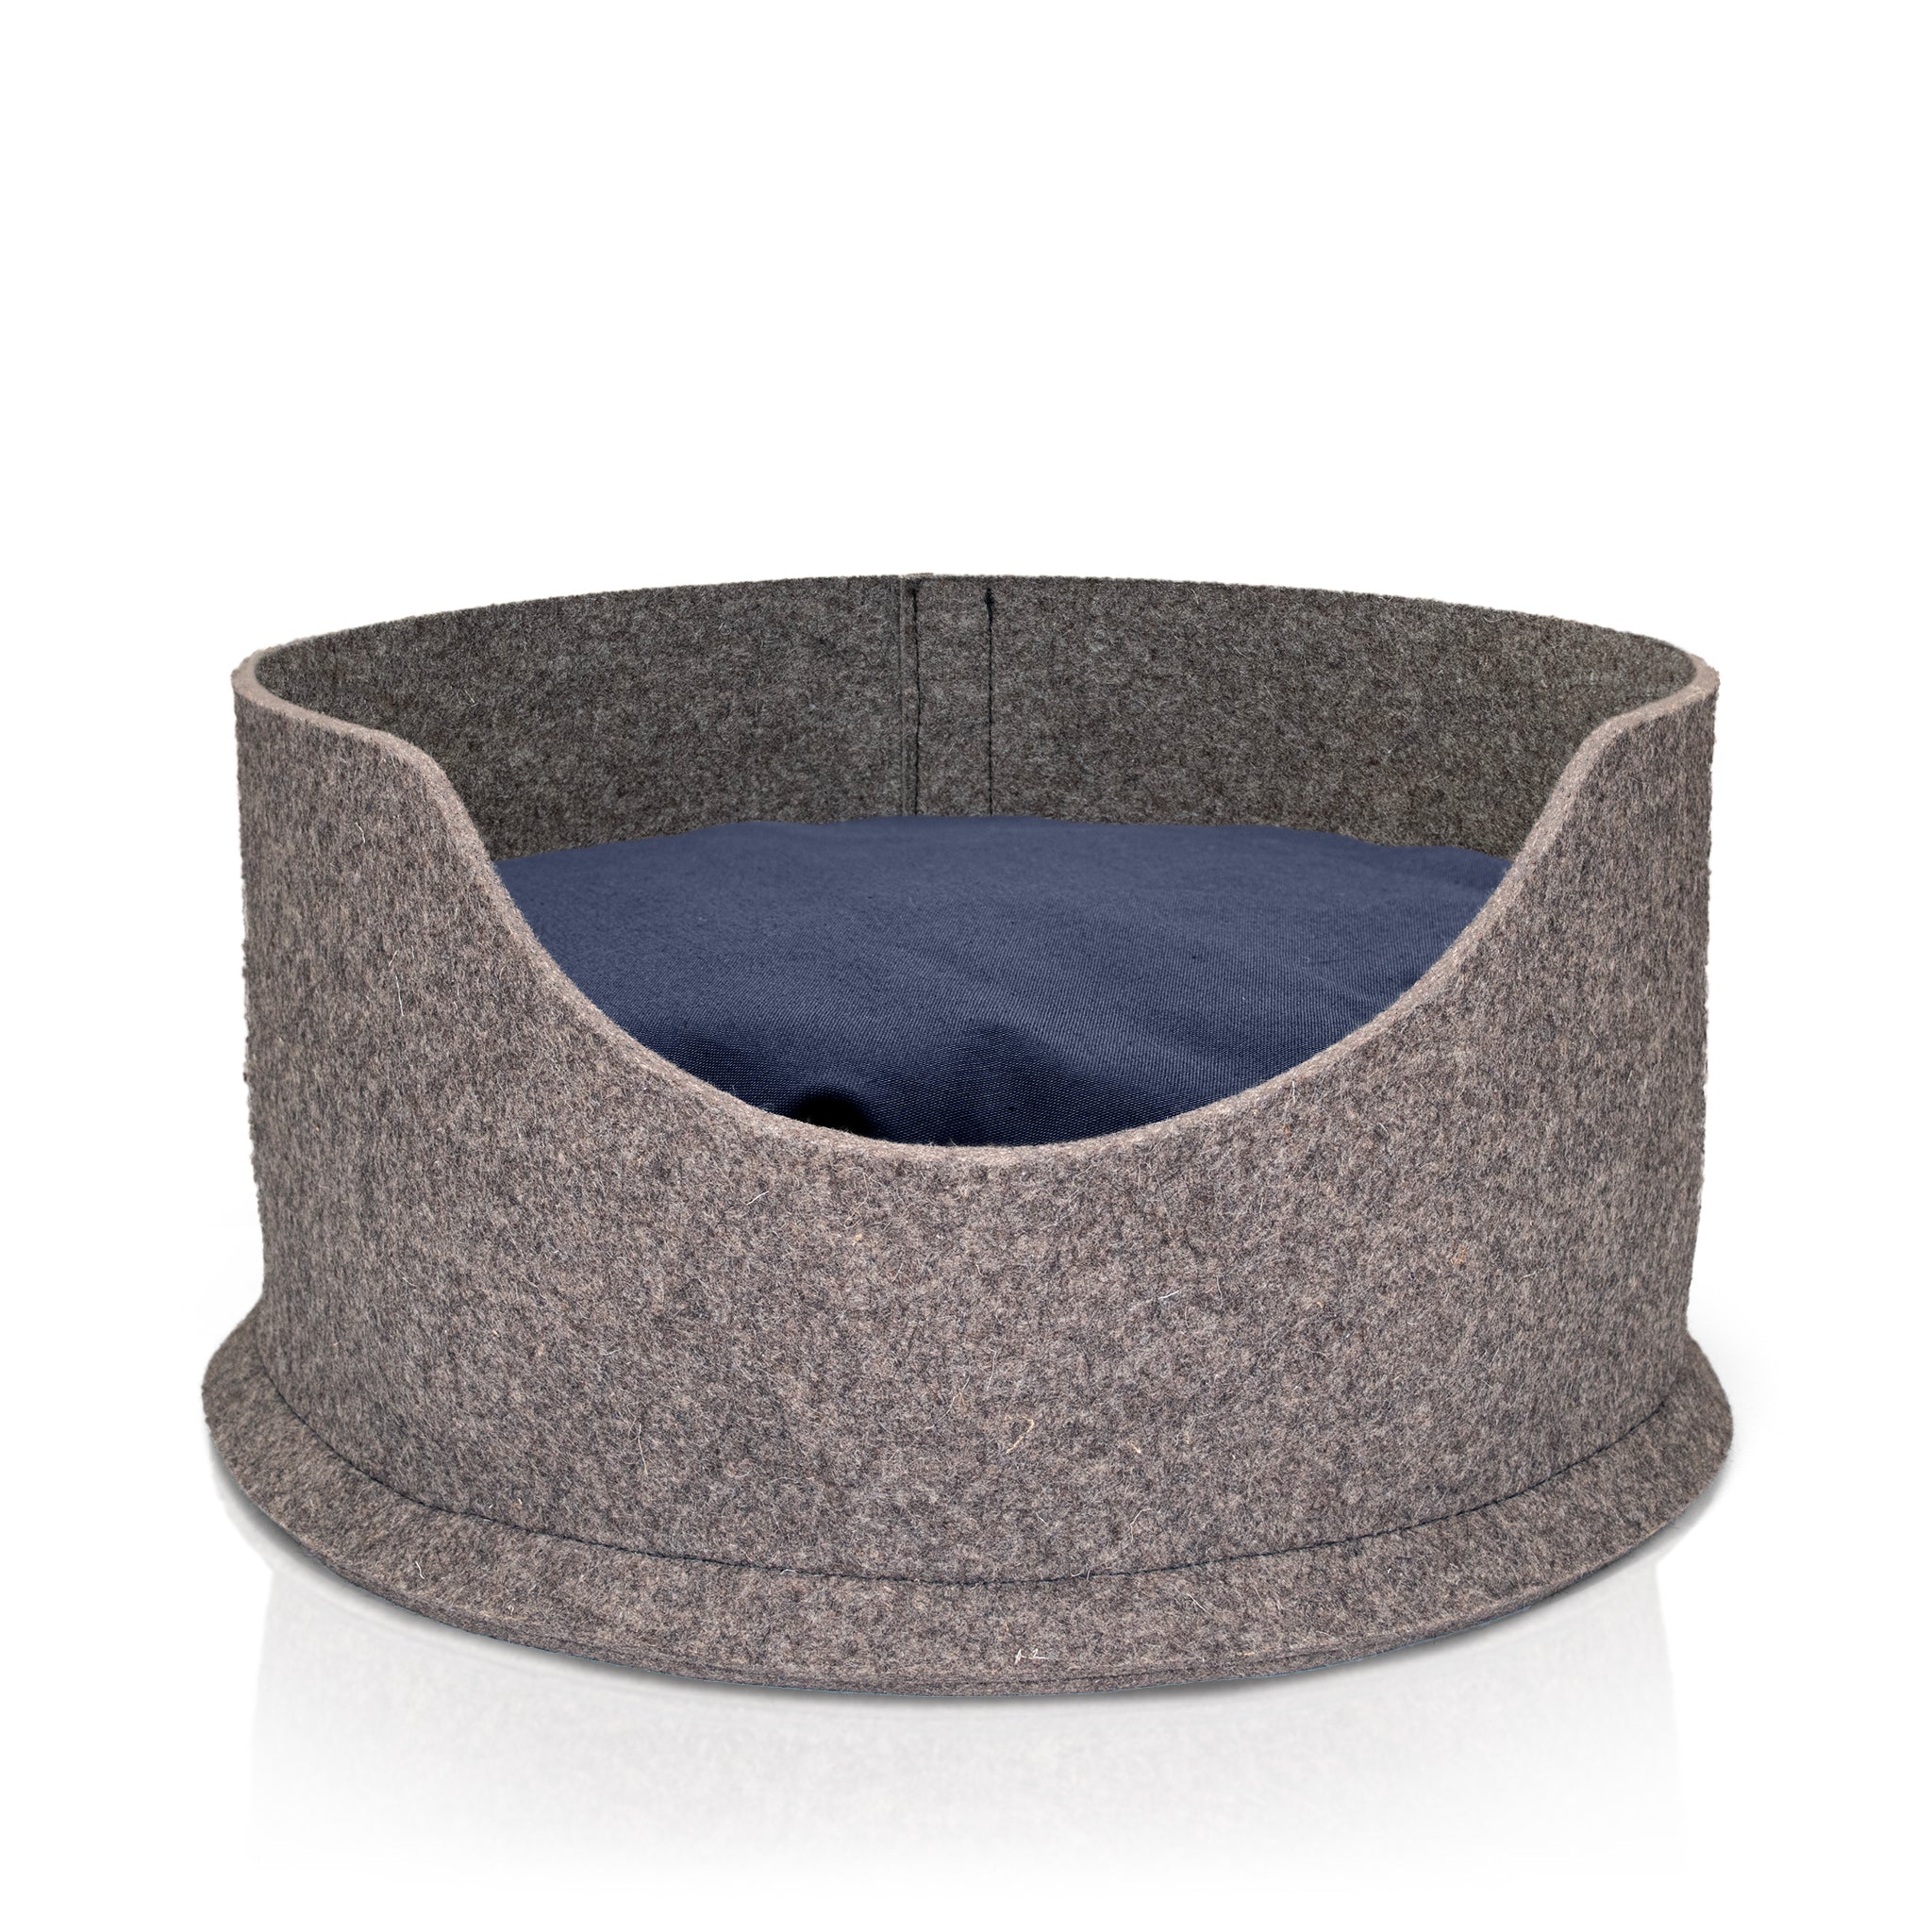 Chimney Sheep felted pet bed in small and large - with a blue cushion inside